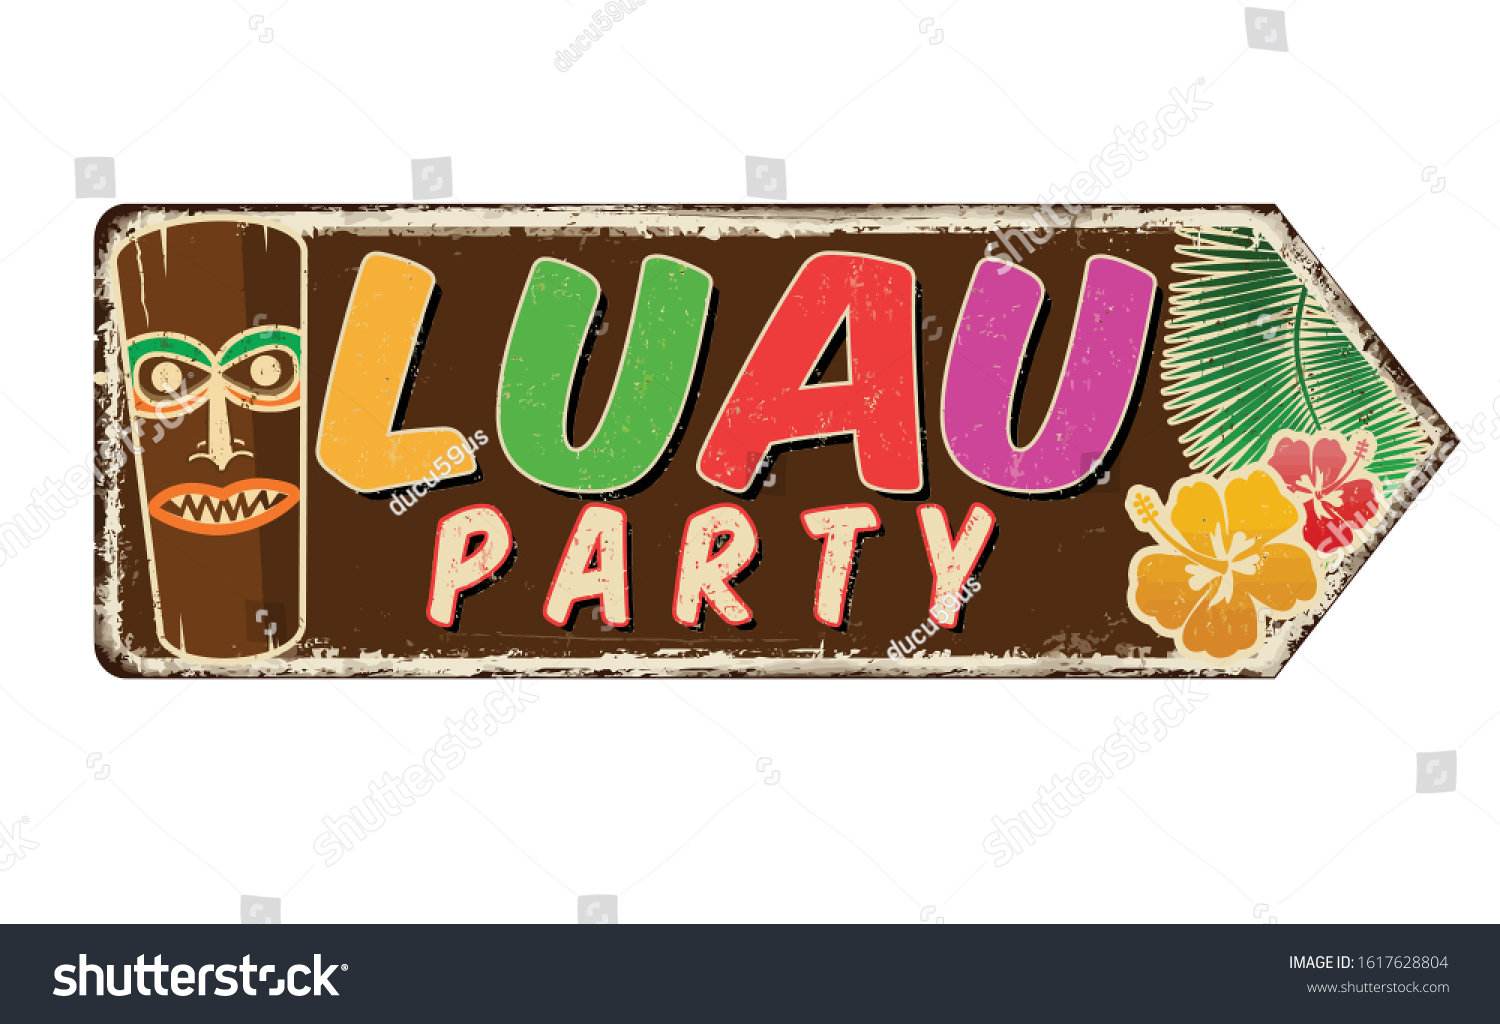 SVG of Luau party vintage rusty metal sign on a white background, vector illustration svg